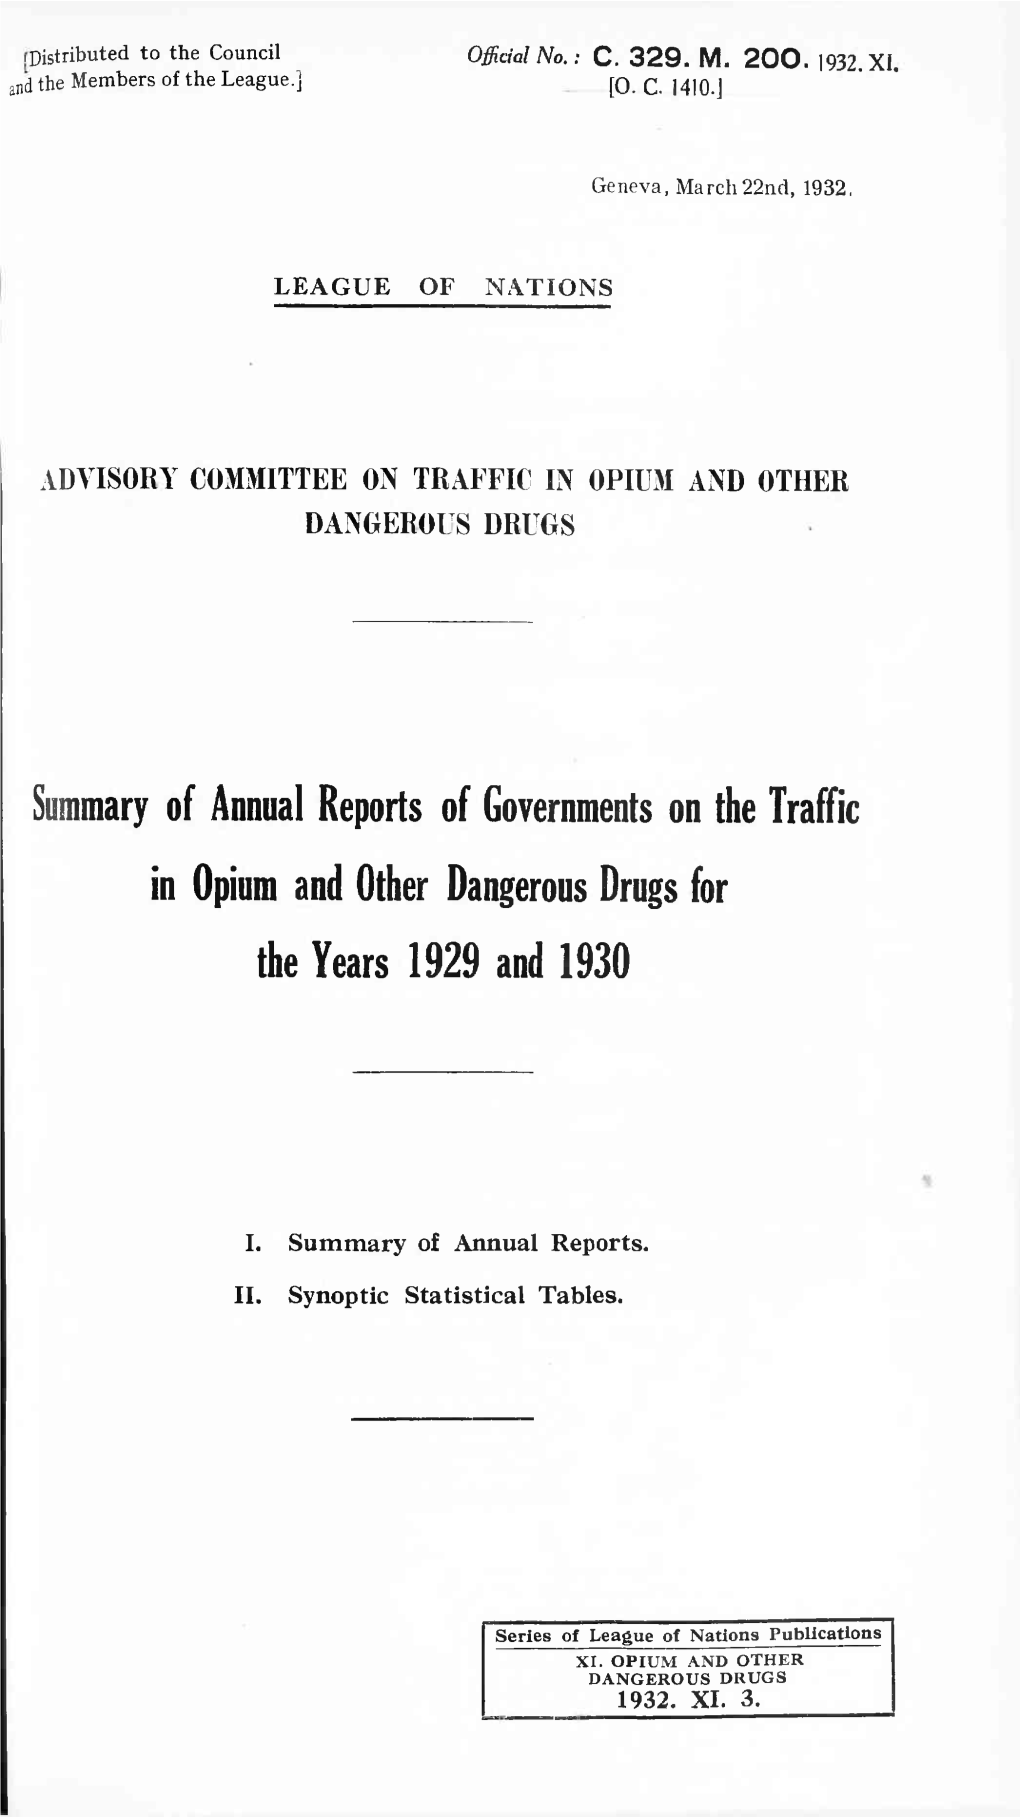 Seminary of Annual Reports of Governments on the Traffic in Opium and Other Dangerous Drugs for the Years 1929 and 1930